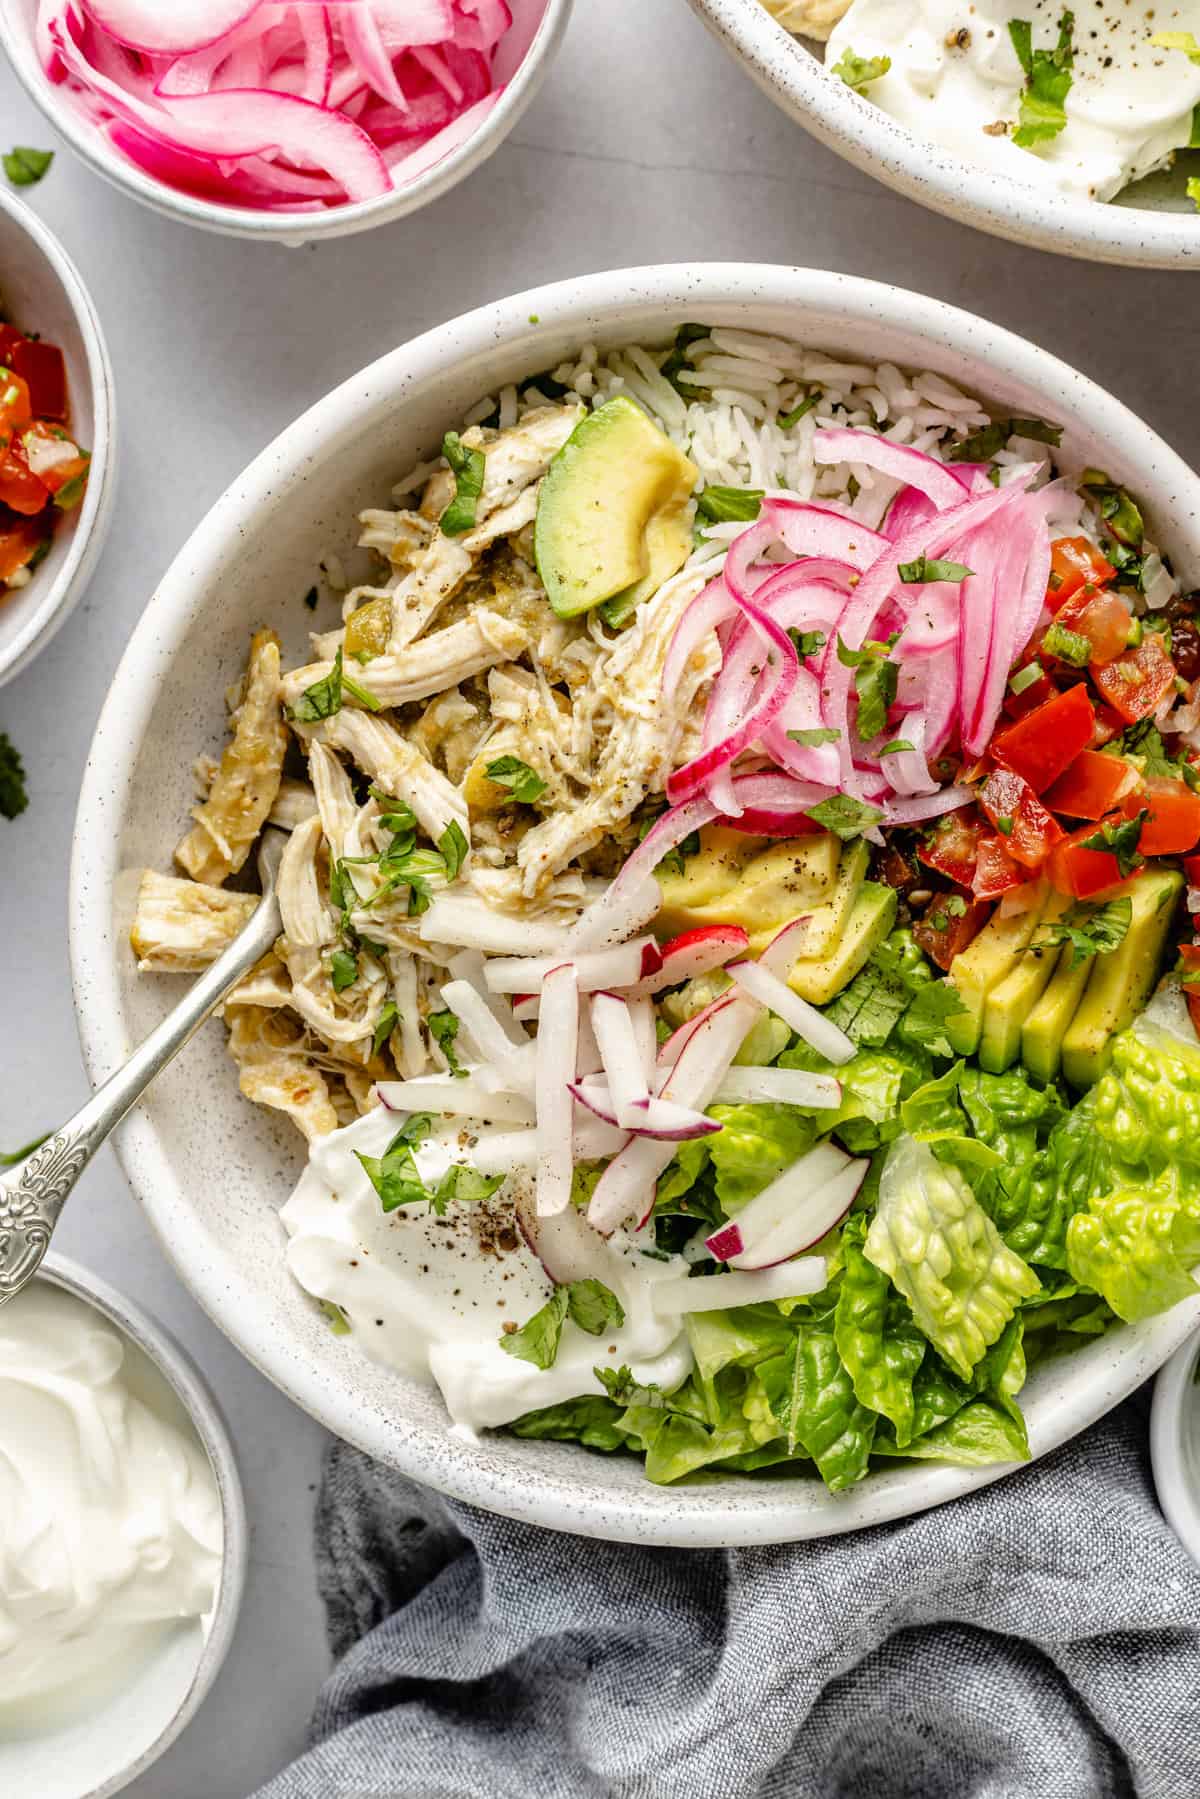 shredded chicken in bowl with toppings